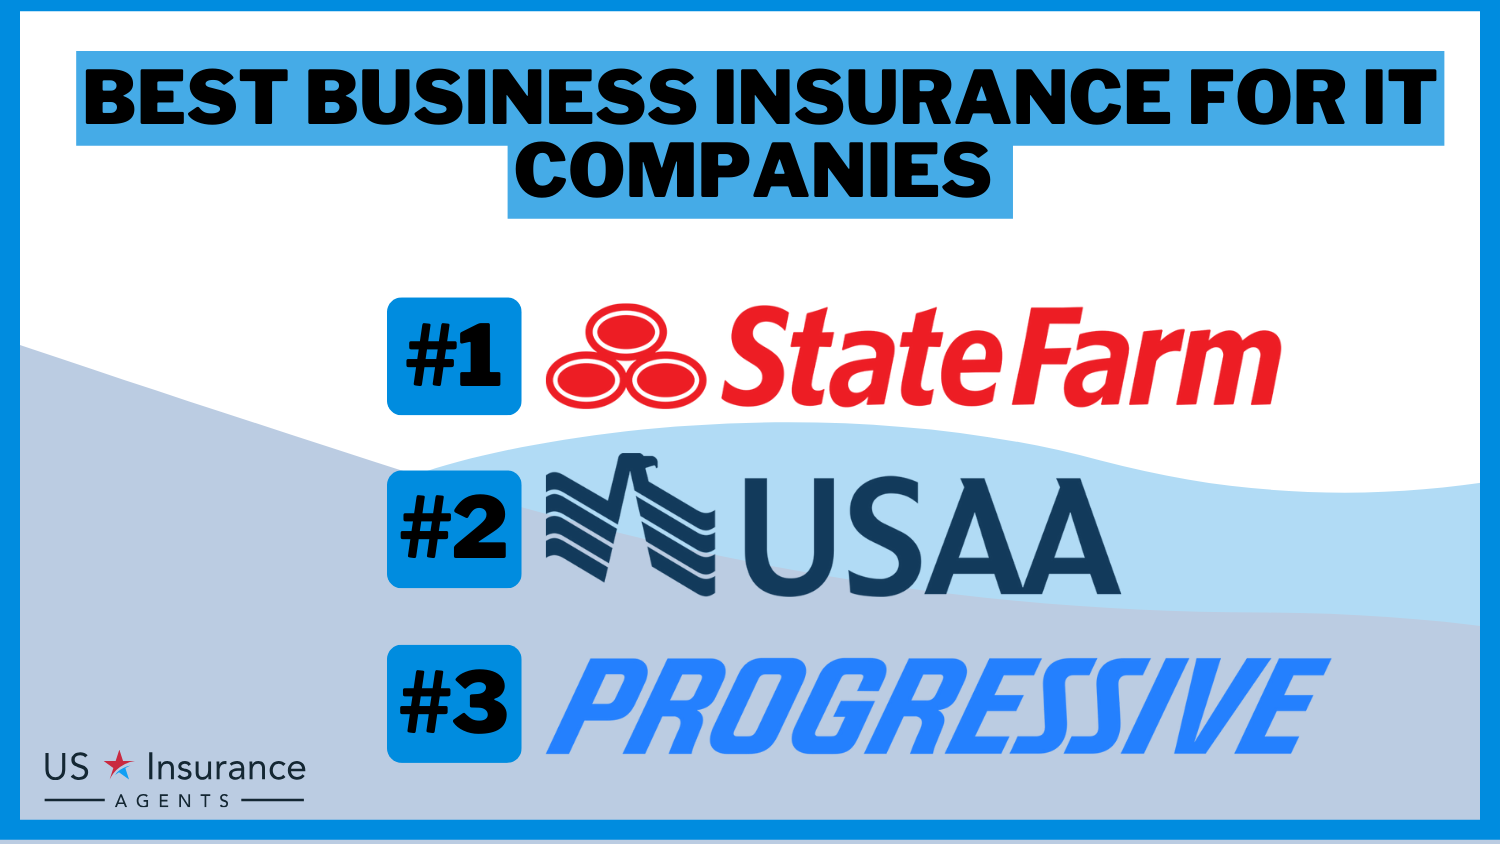 3 Best Business Insurance for IT Companies: State Farm, USAA and Progressive.